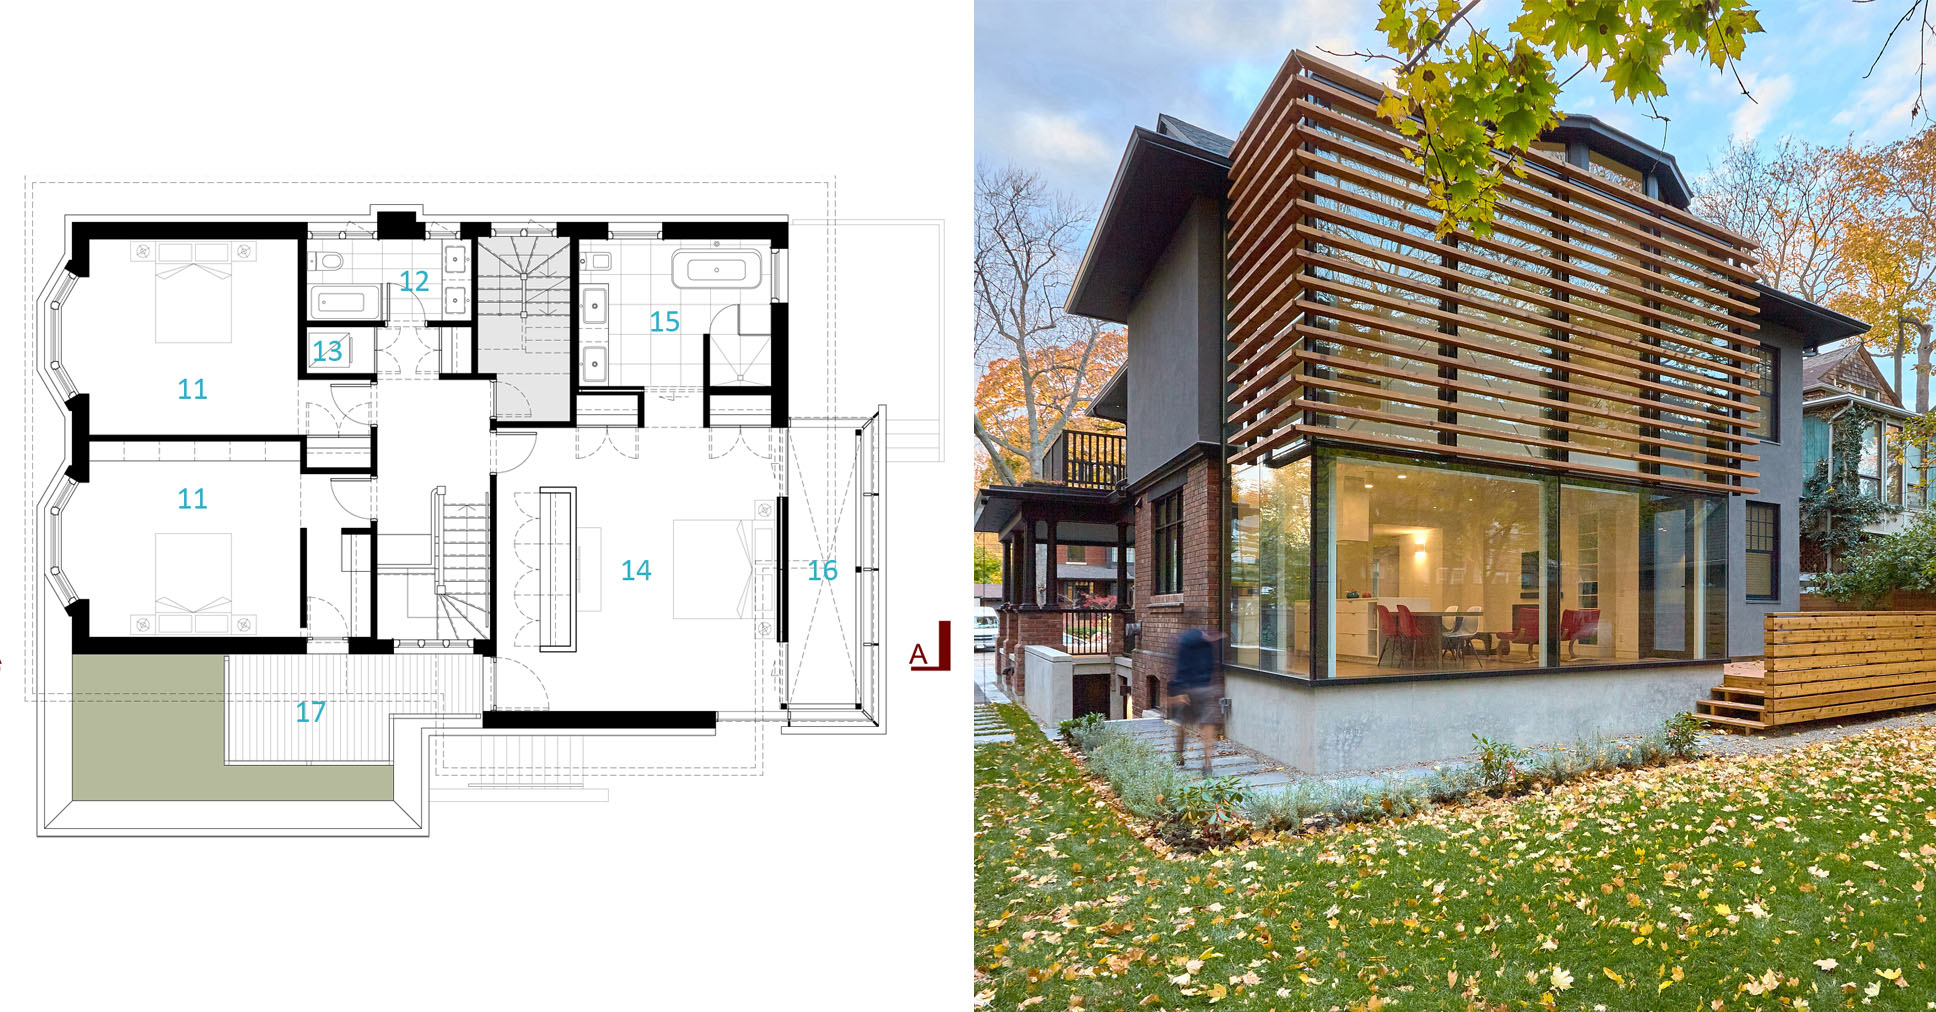 Architectural Drawings: Toronto’s Modern Home Designs in Plan and Section